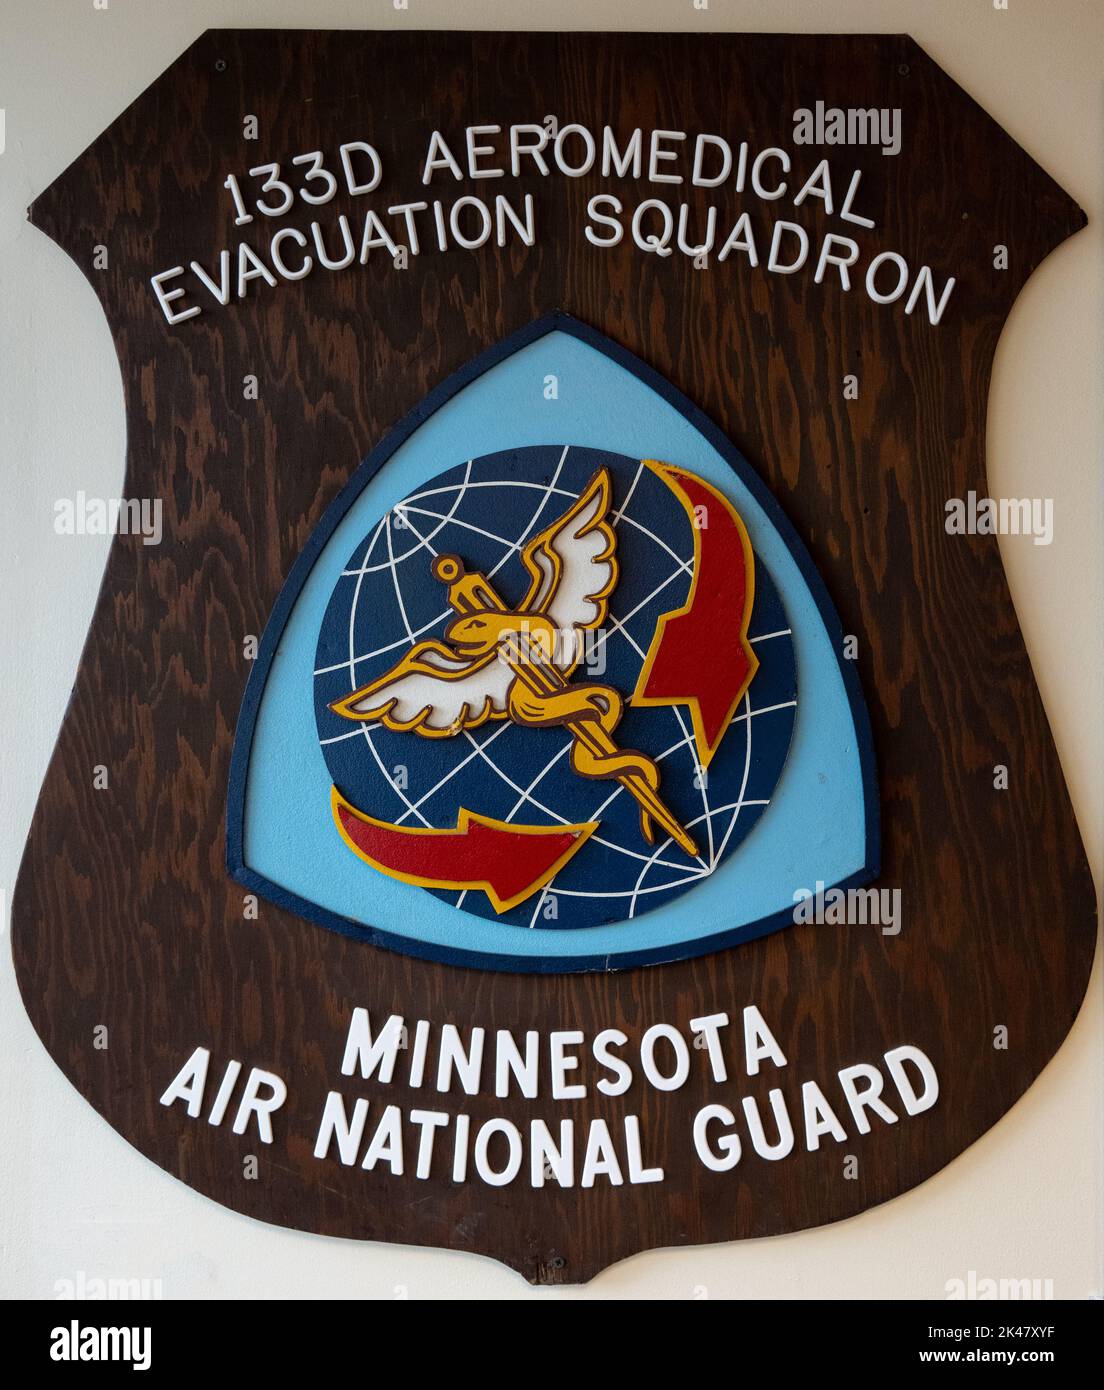 The shield and logo of the 133d Aeromedical Evacuation Squadron of the Minnesota Air National Guard Stock Photo